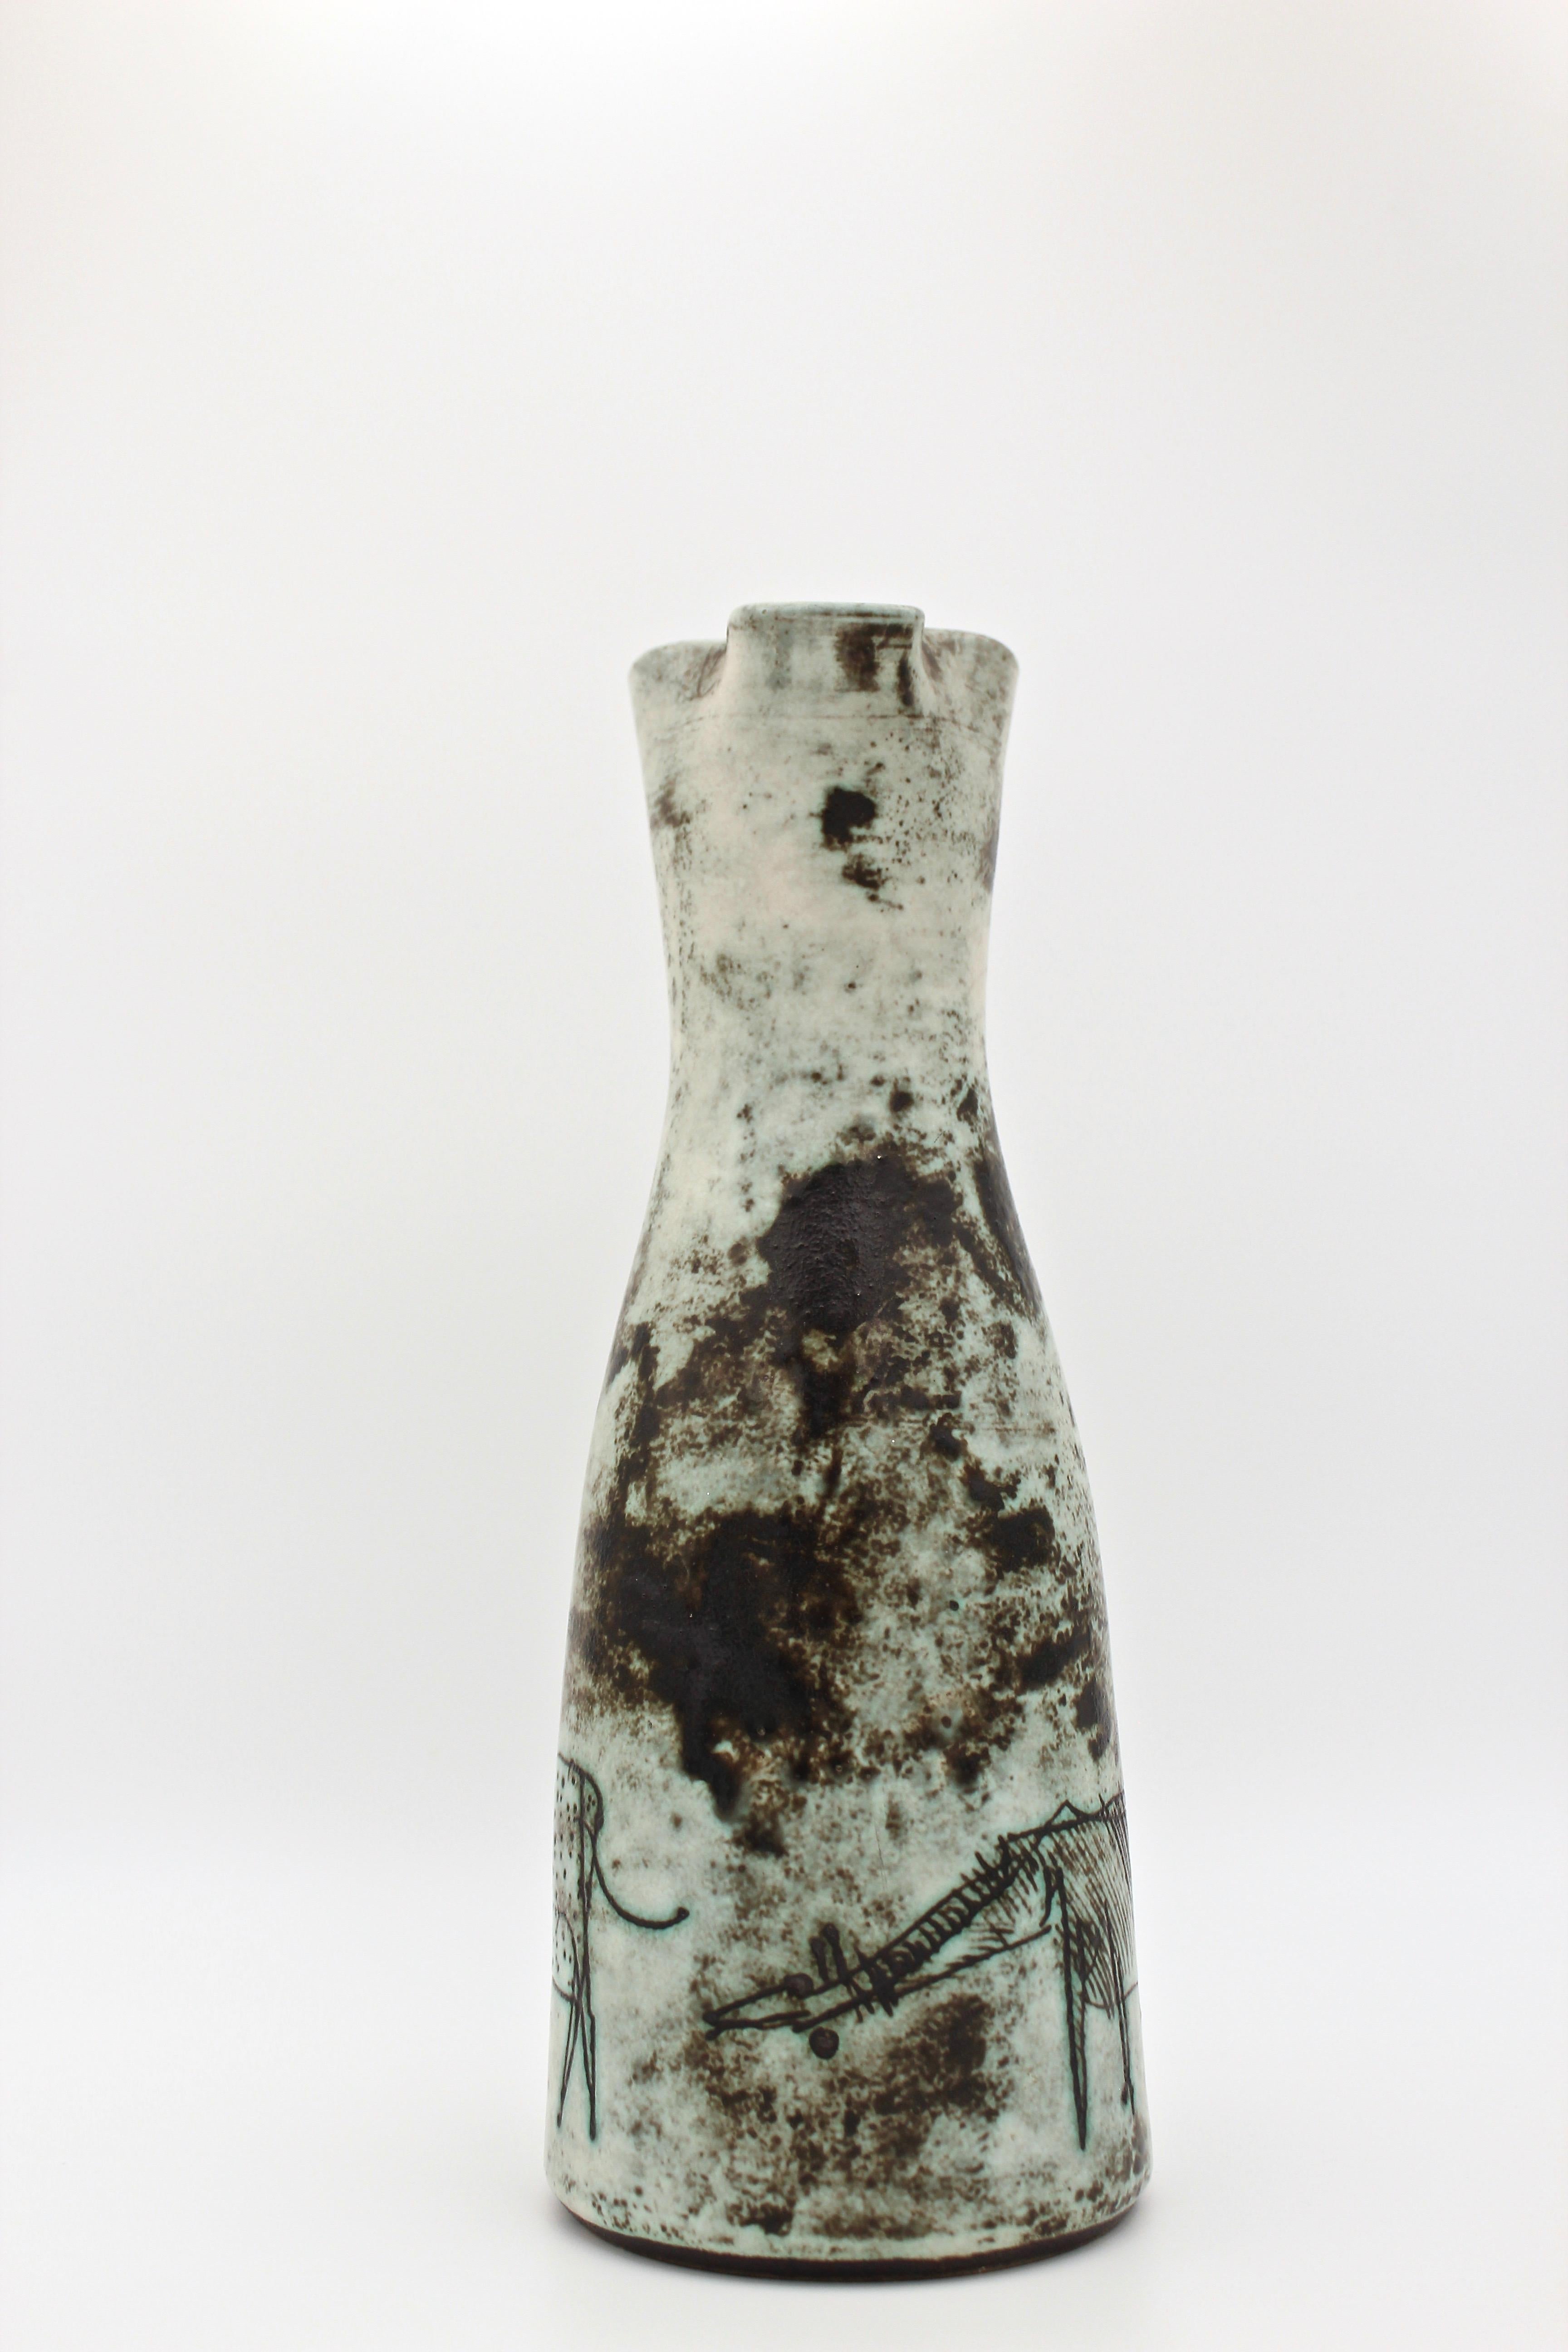 Glazed Midcentury French Ceramic Pitcher by Jacques Blin, 1950s